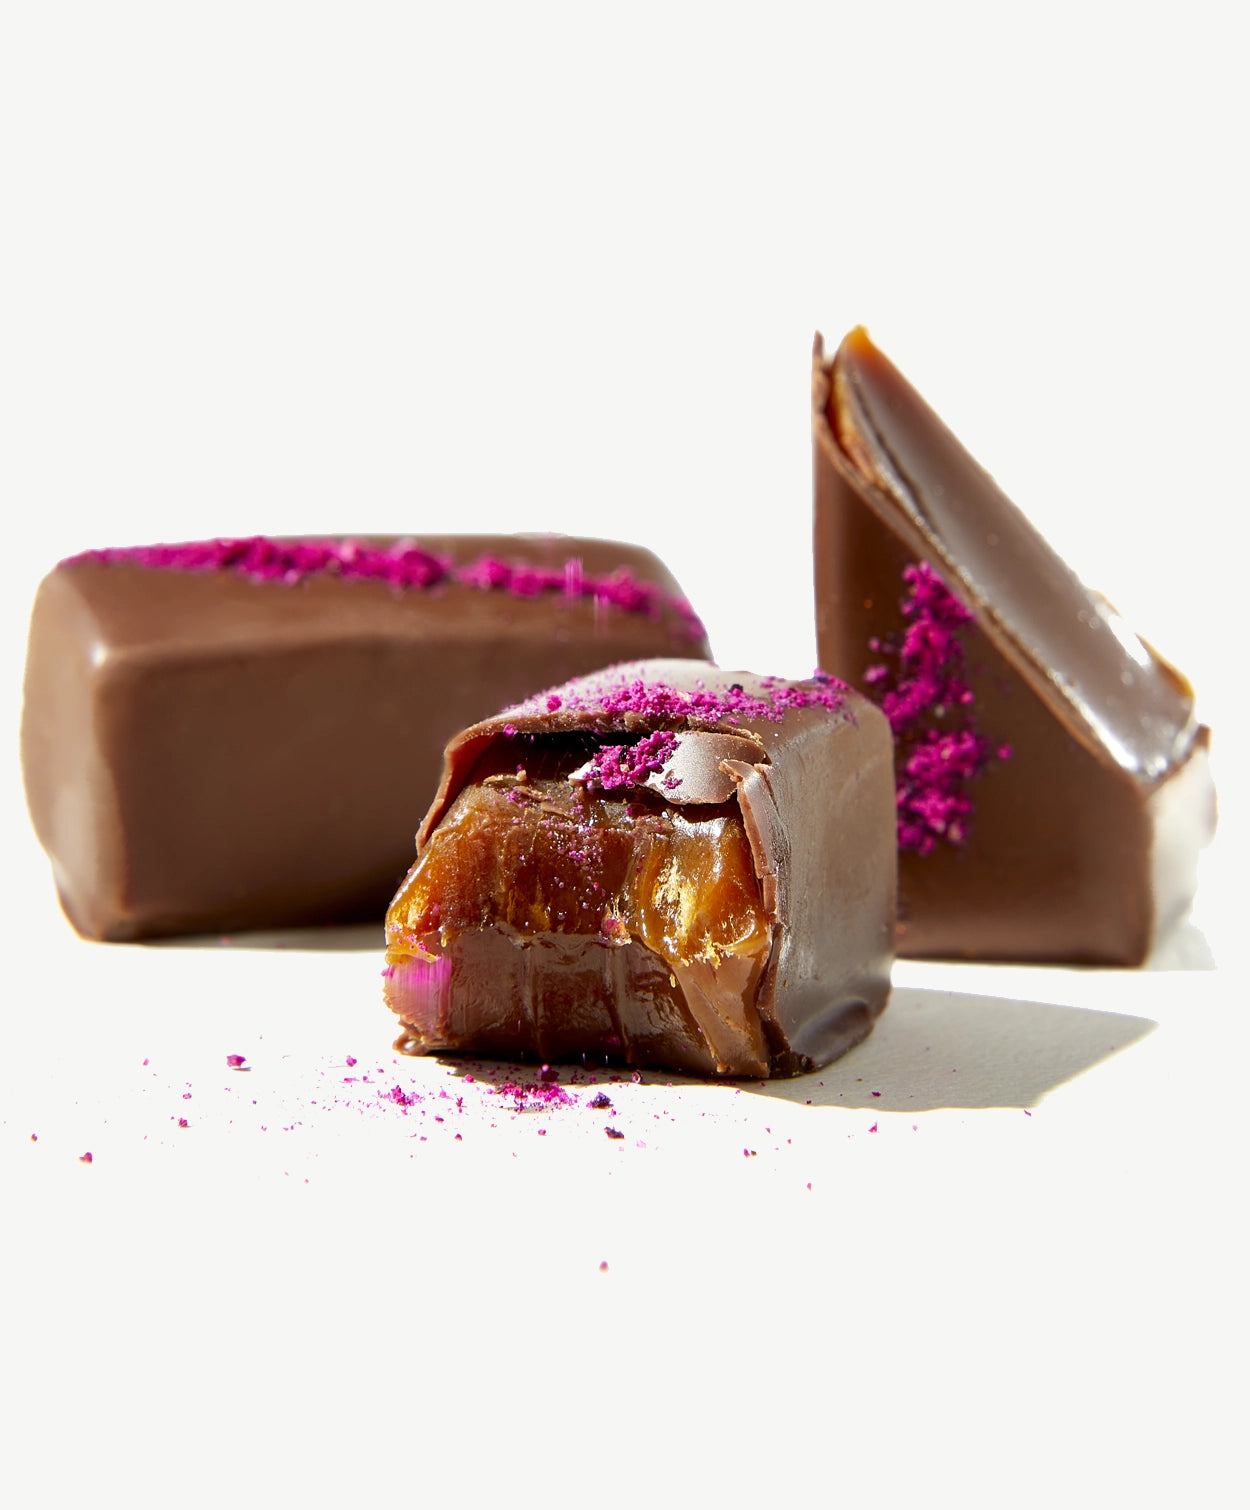 Close up of two Vosges caramels, one bitten displaying buttery caramel center and milk chocolate coating on a white background.